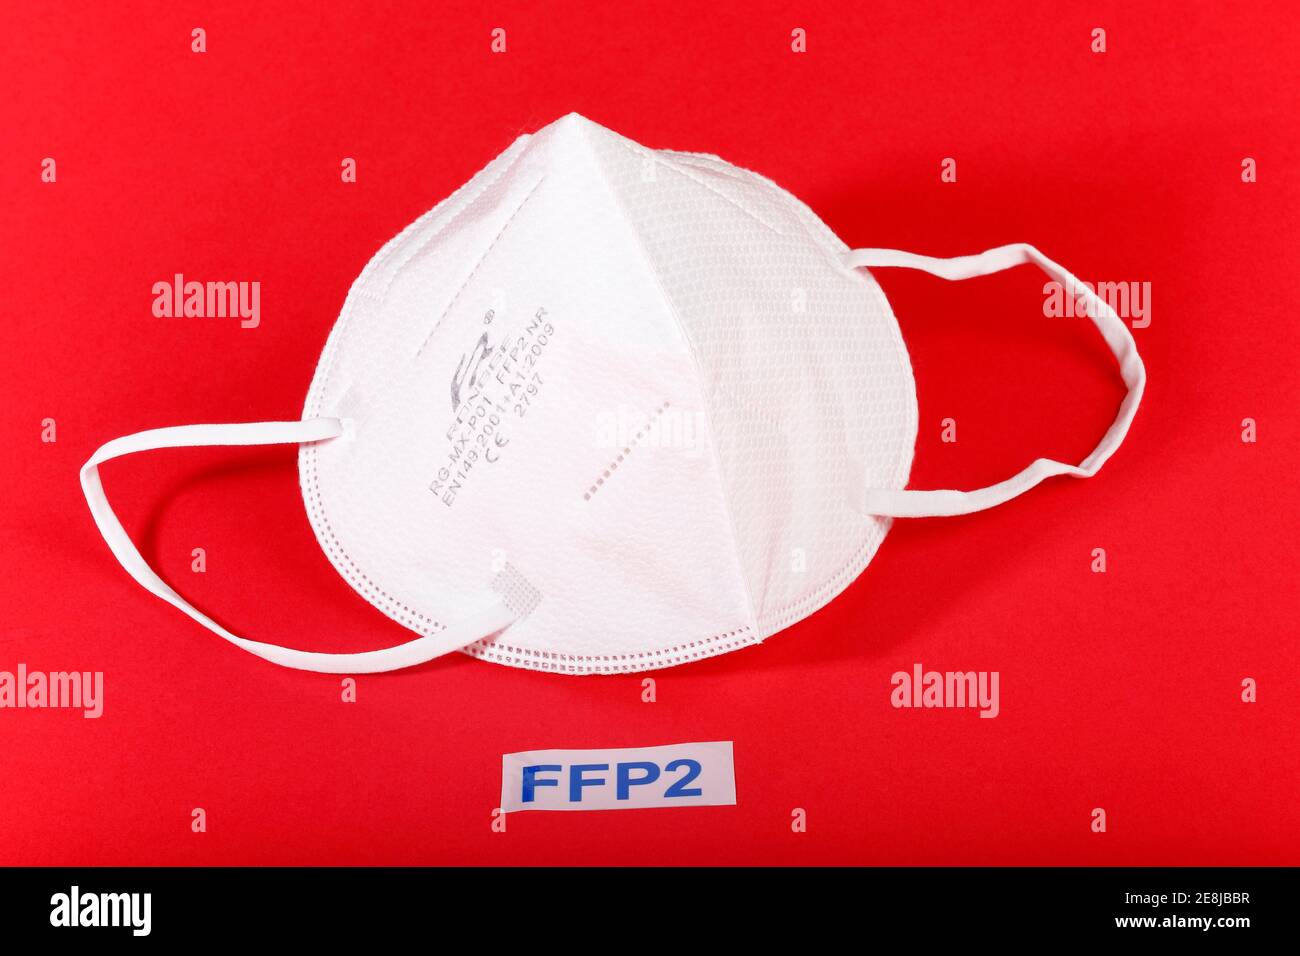 FFP2 mask, Corona protective mask for mouth and nose, Corona pandemic, Schleswig-Holstein, Germany Stock Photo